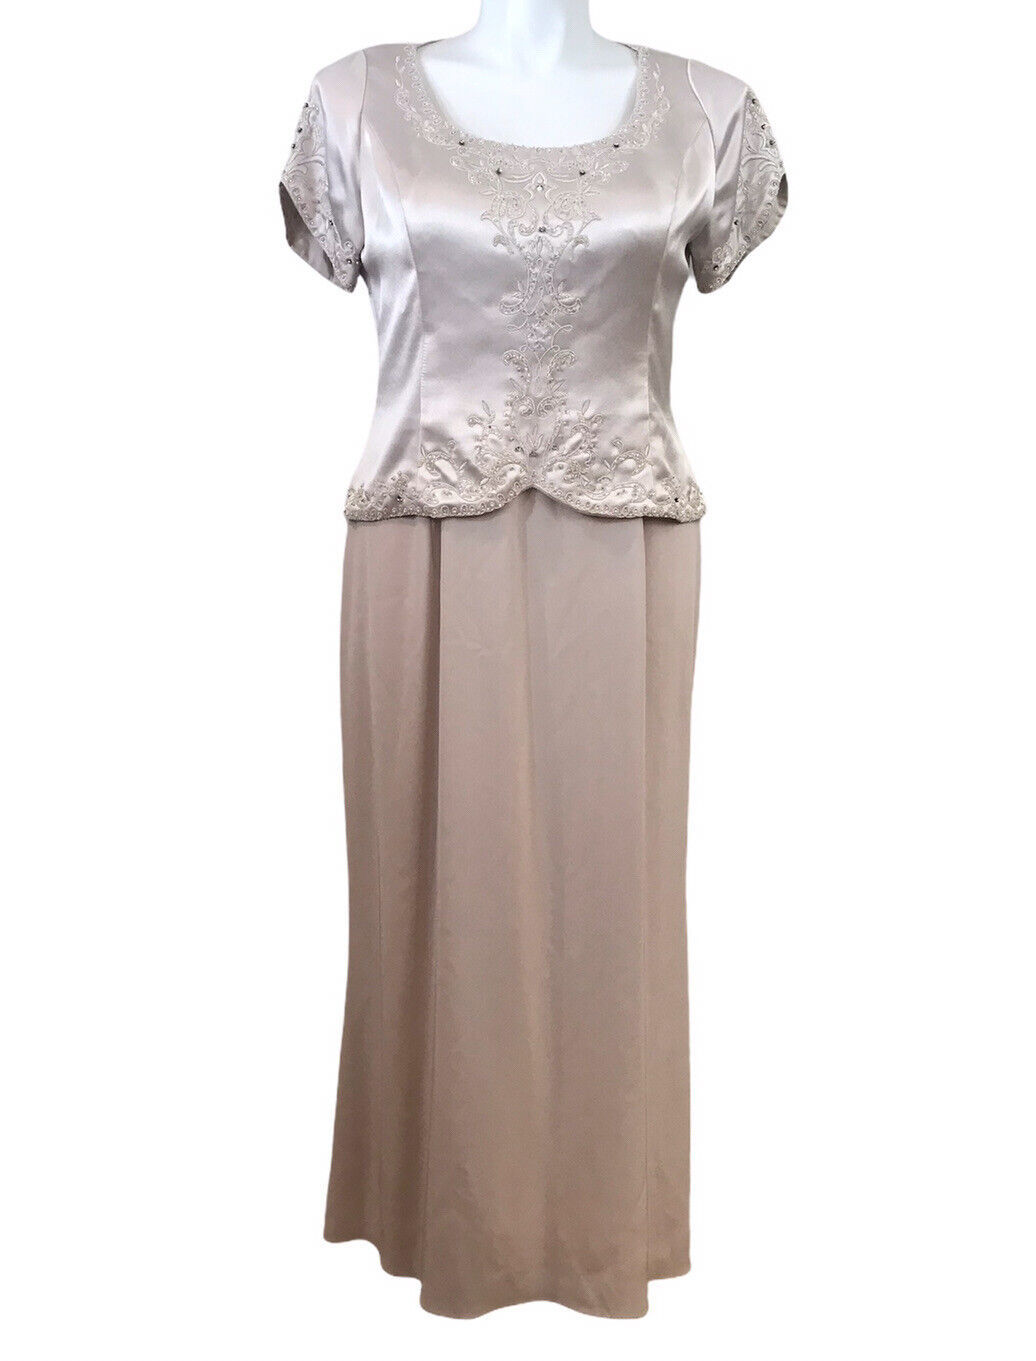 Primary image for Mon Cheri Montage Formal Dress Size 16 Color Stone Mother of Bride/Groom 2 pc.